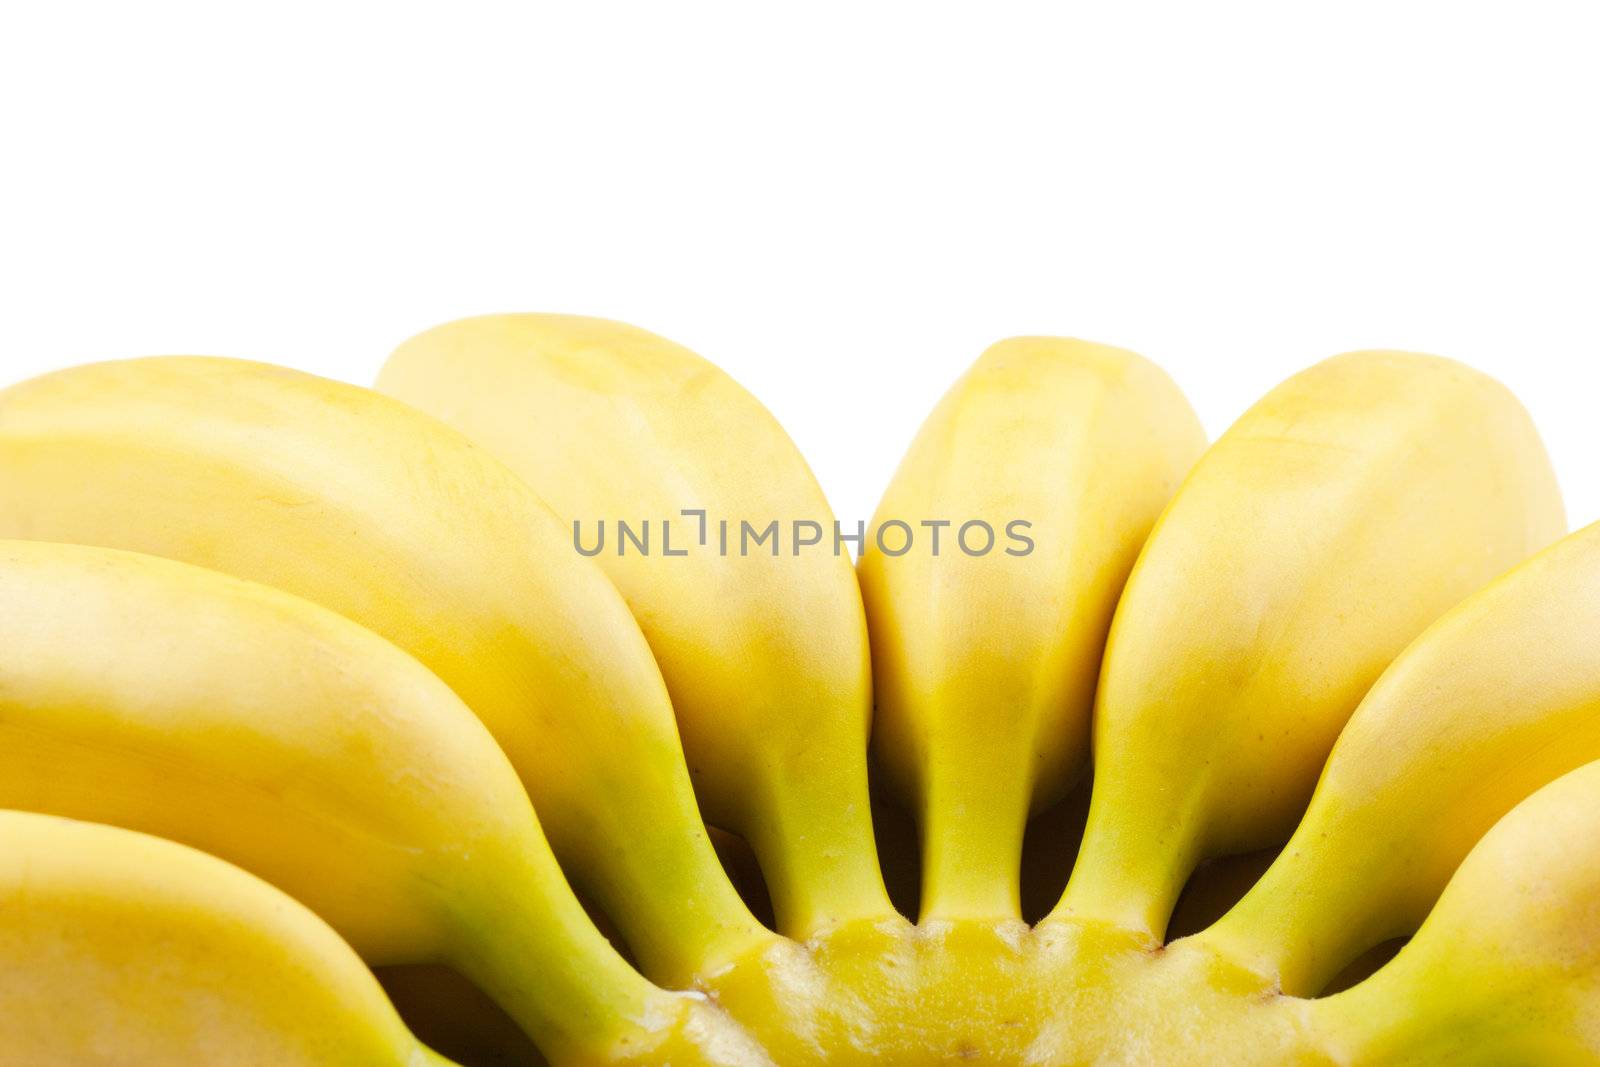 A bunch of bananas isolated over white background